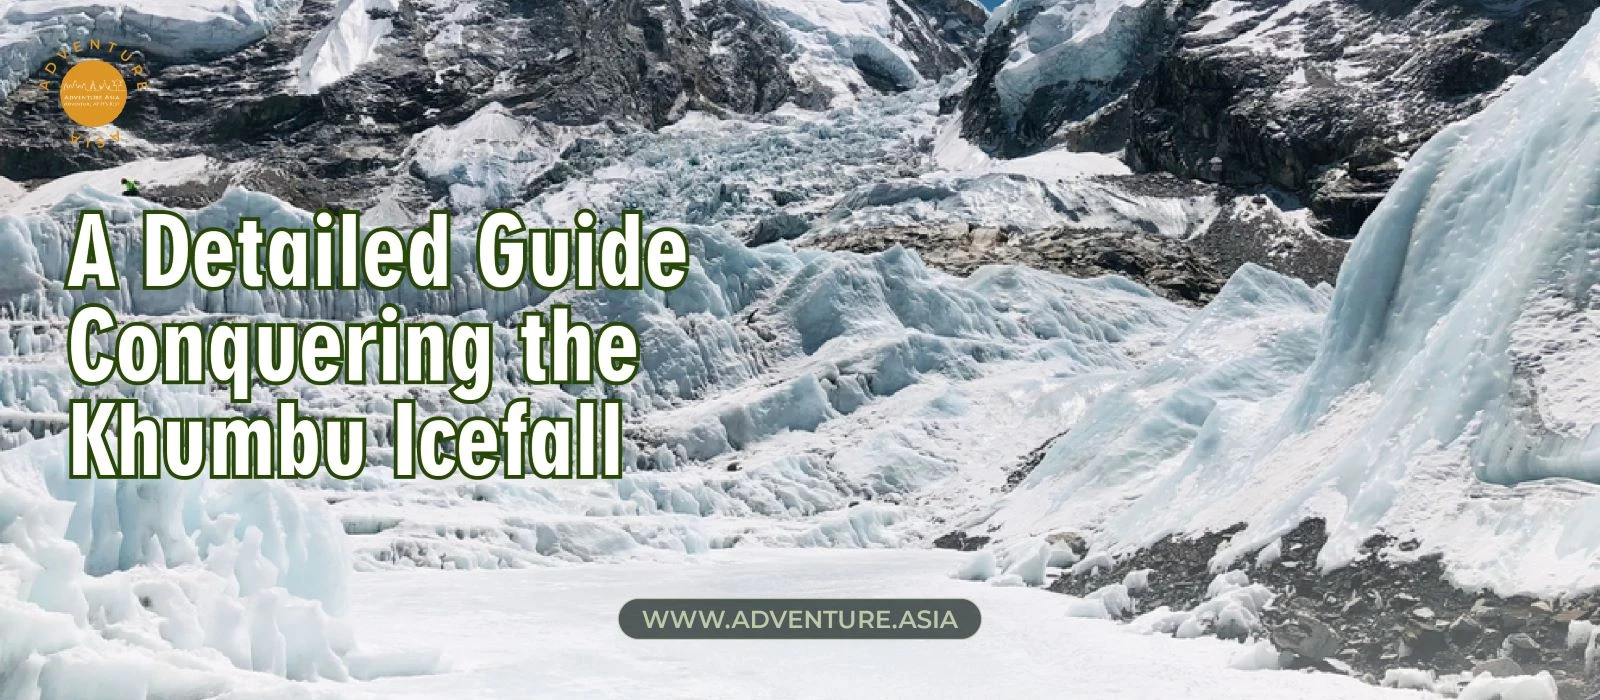 Conquering the Khumbu Icefall - A Detailed Guide for everest base camp nepal treks